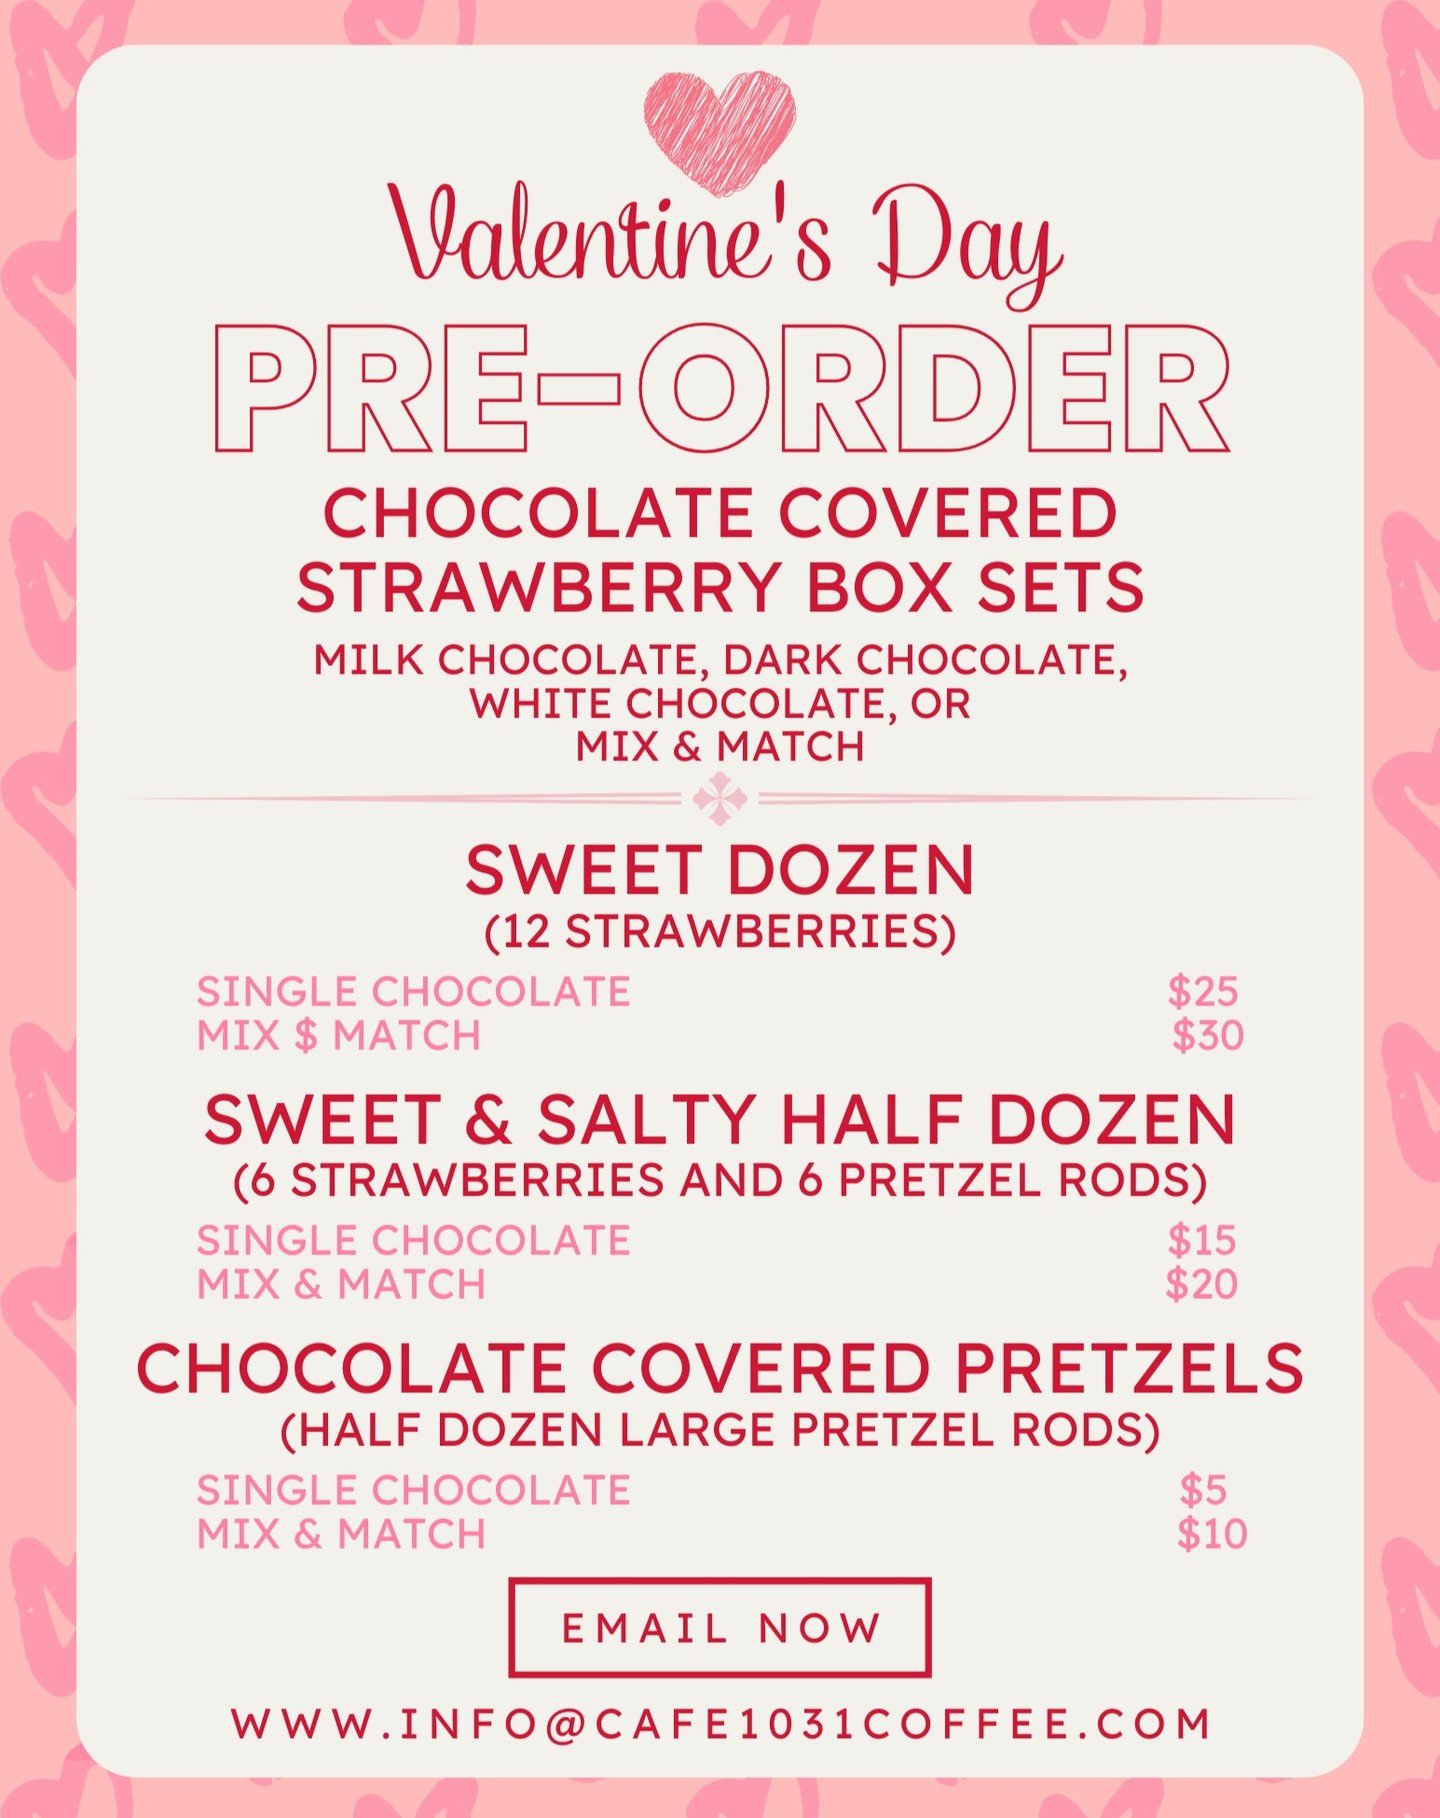 We are so excited to announce a special deal for Valentine's Day! Our 1st ever Chocolate Covered Strawberries Box Set for pre-sale now through February 12th. 

Choose from one type of chocolate for the whole box or mix &amp; match two or all three av